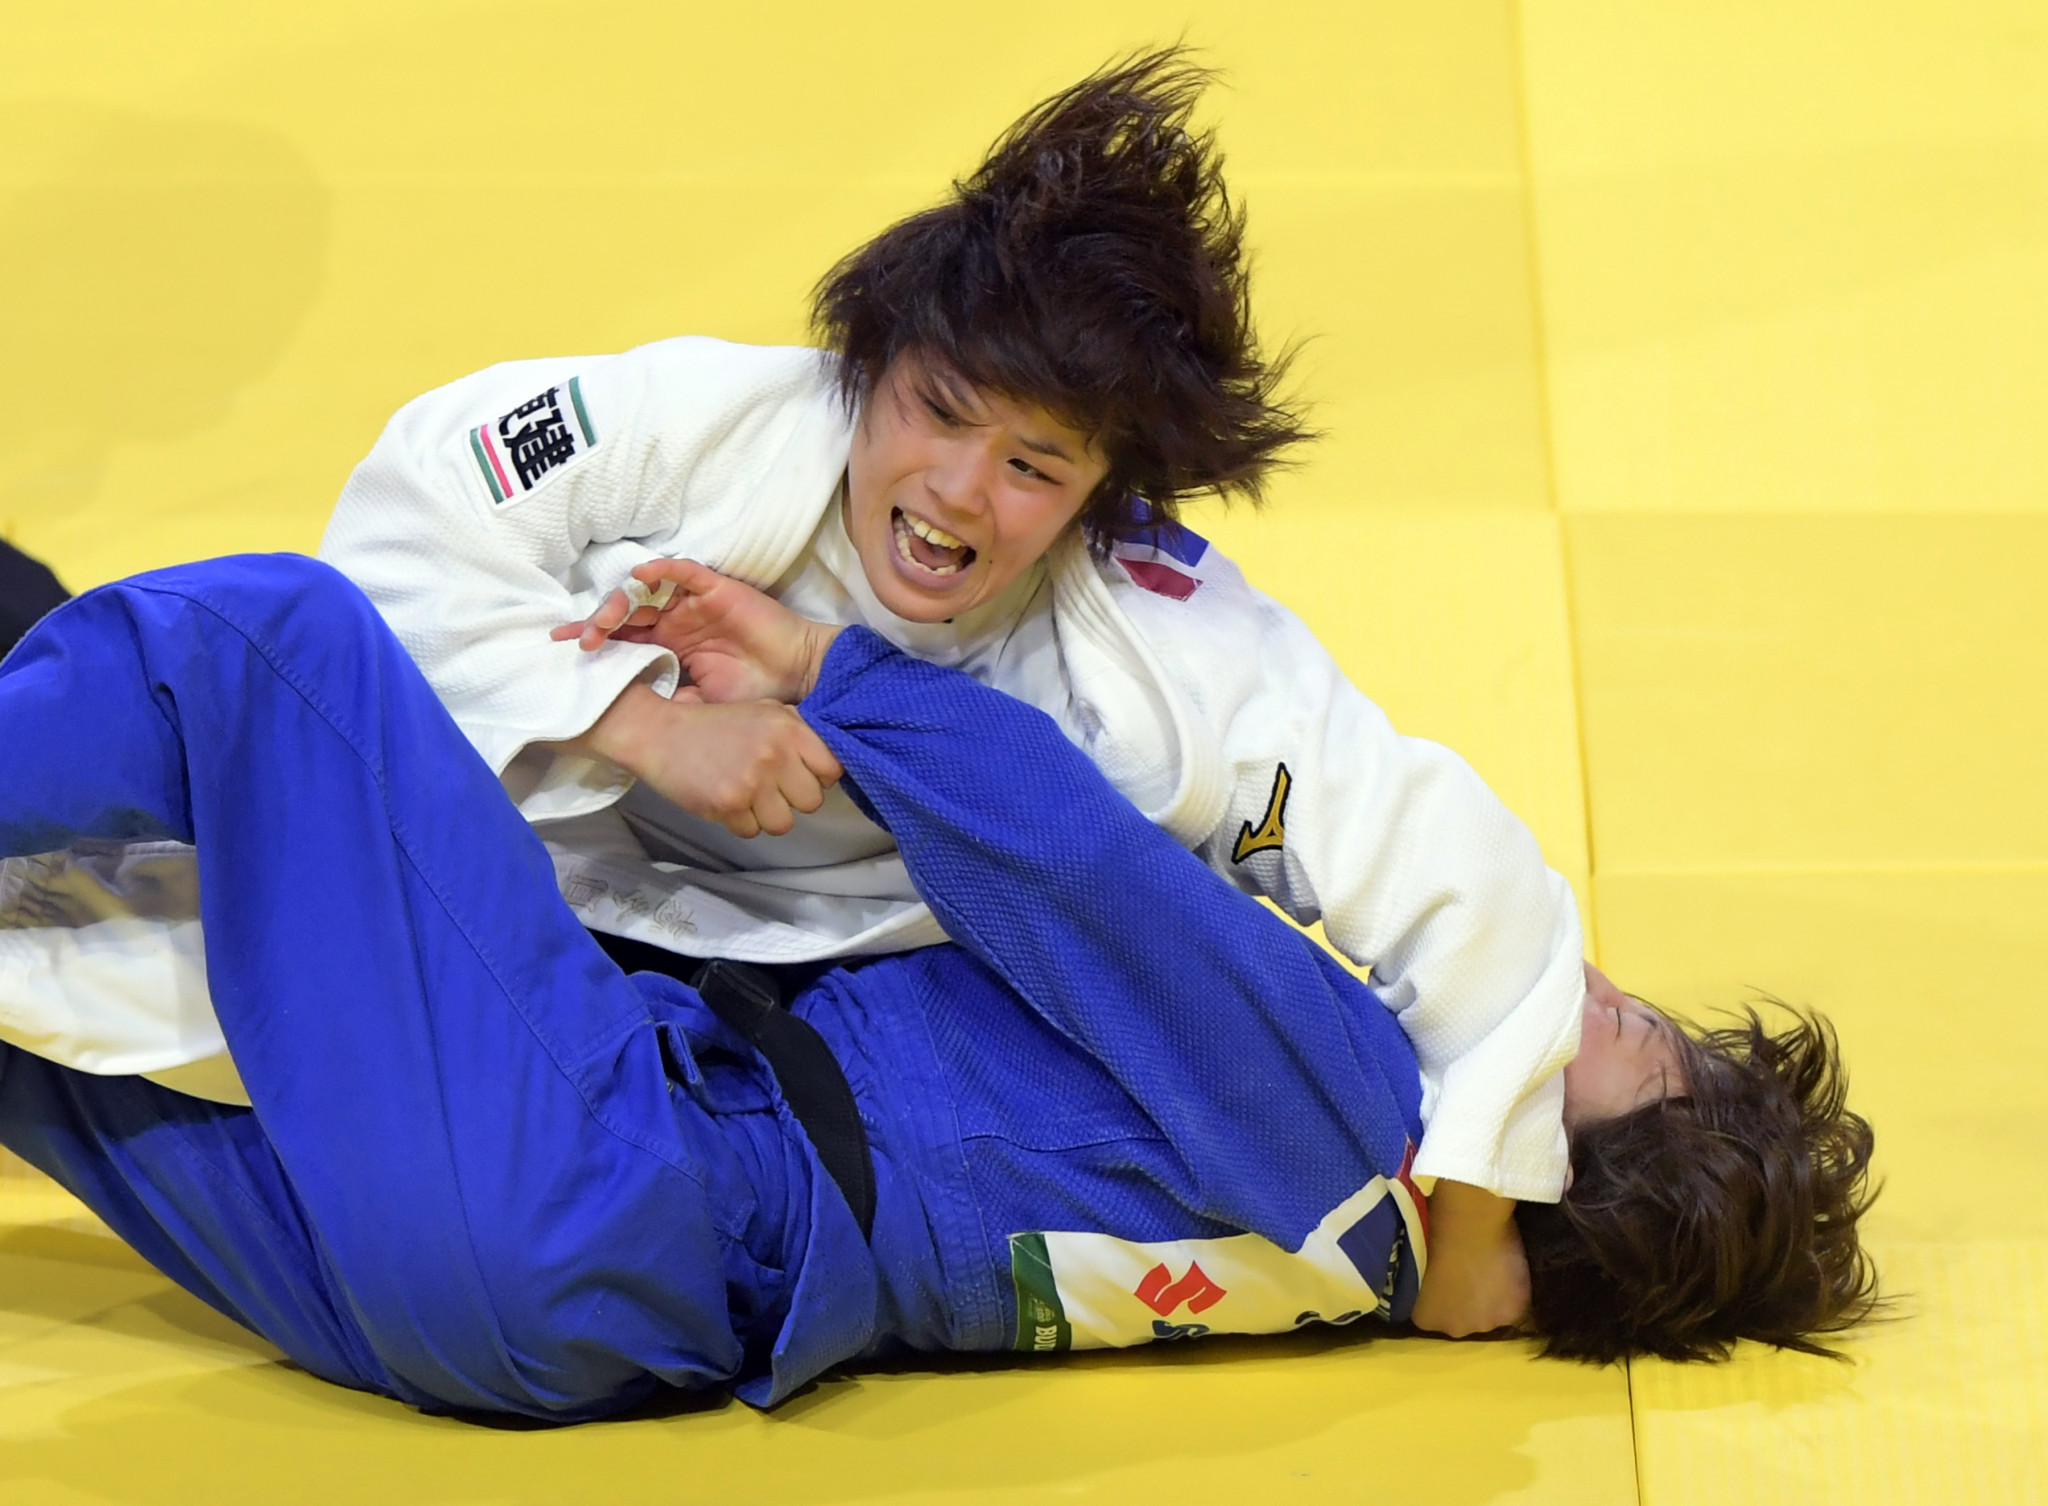 Japan win both gold medals on offer on day two at IJF World Championships